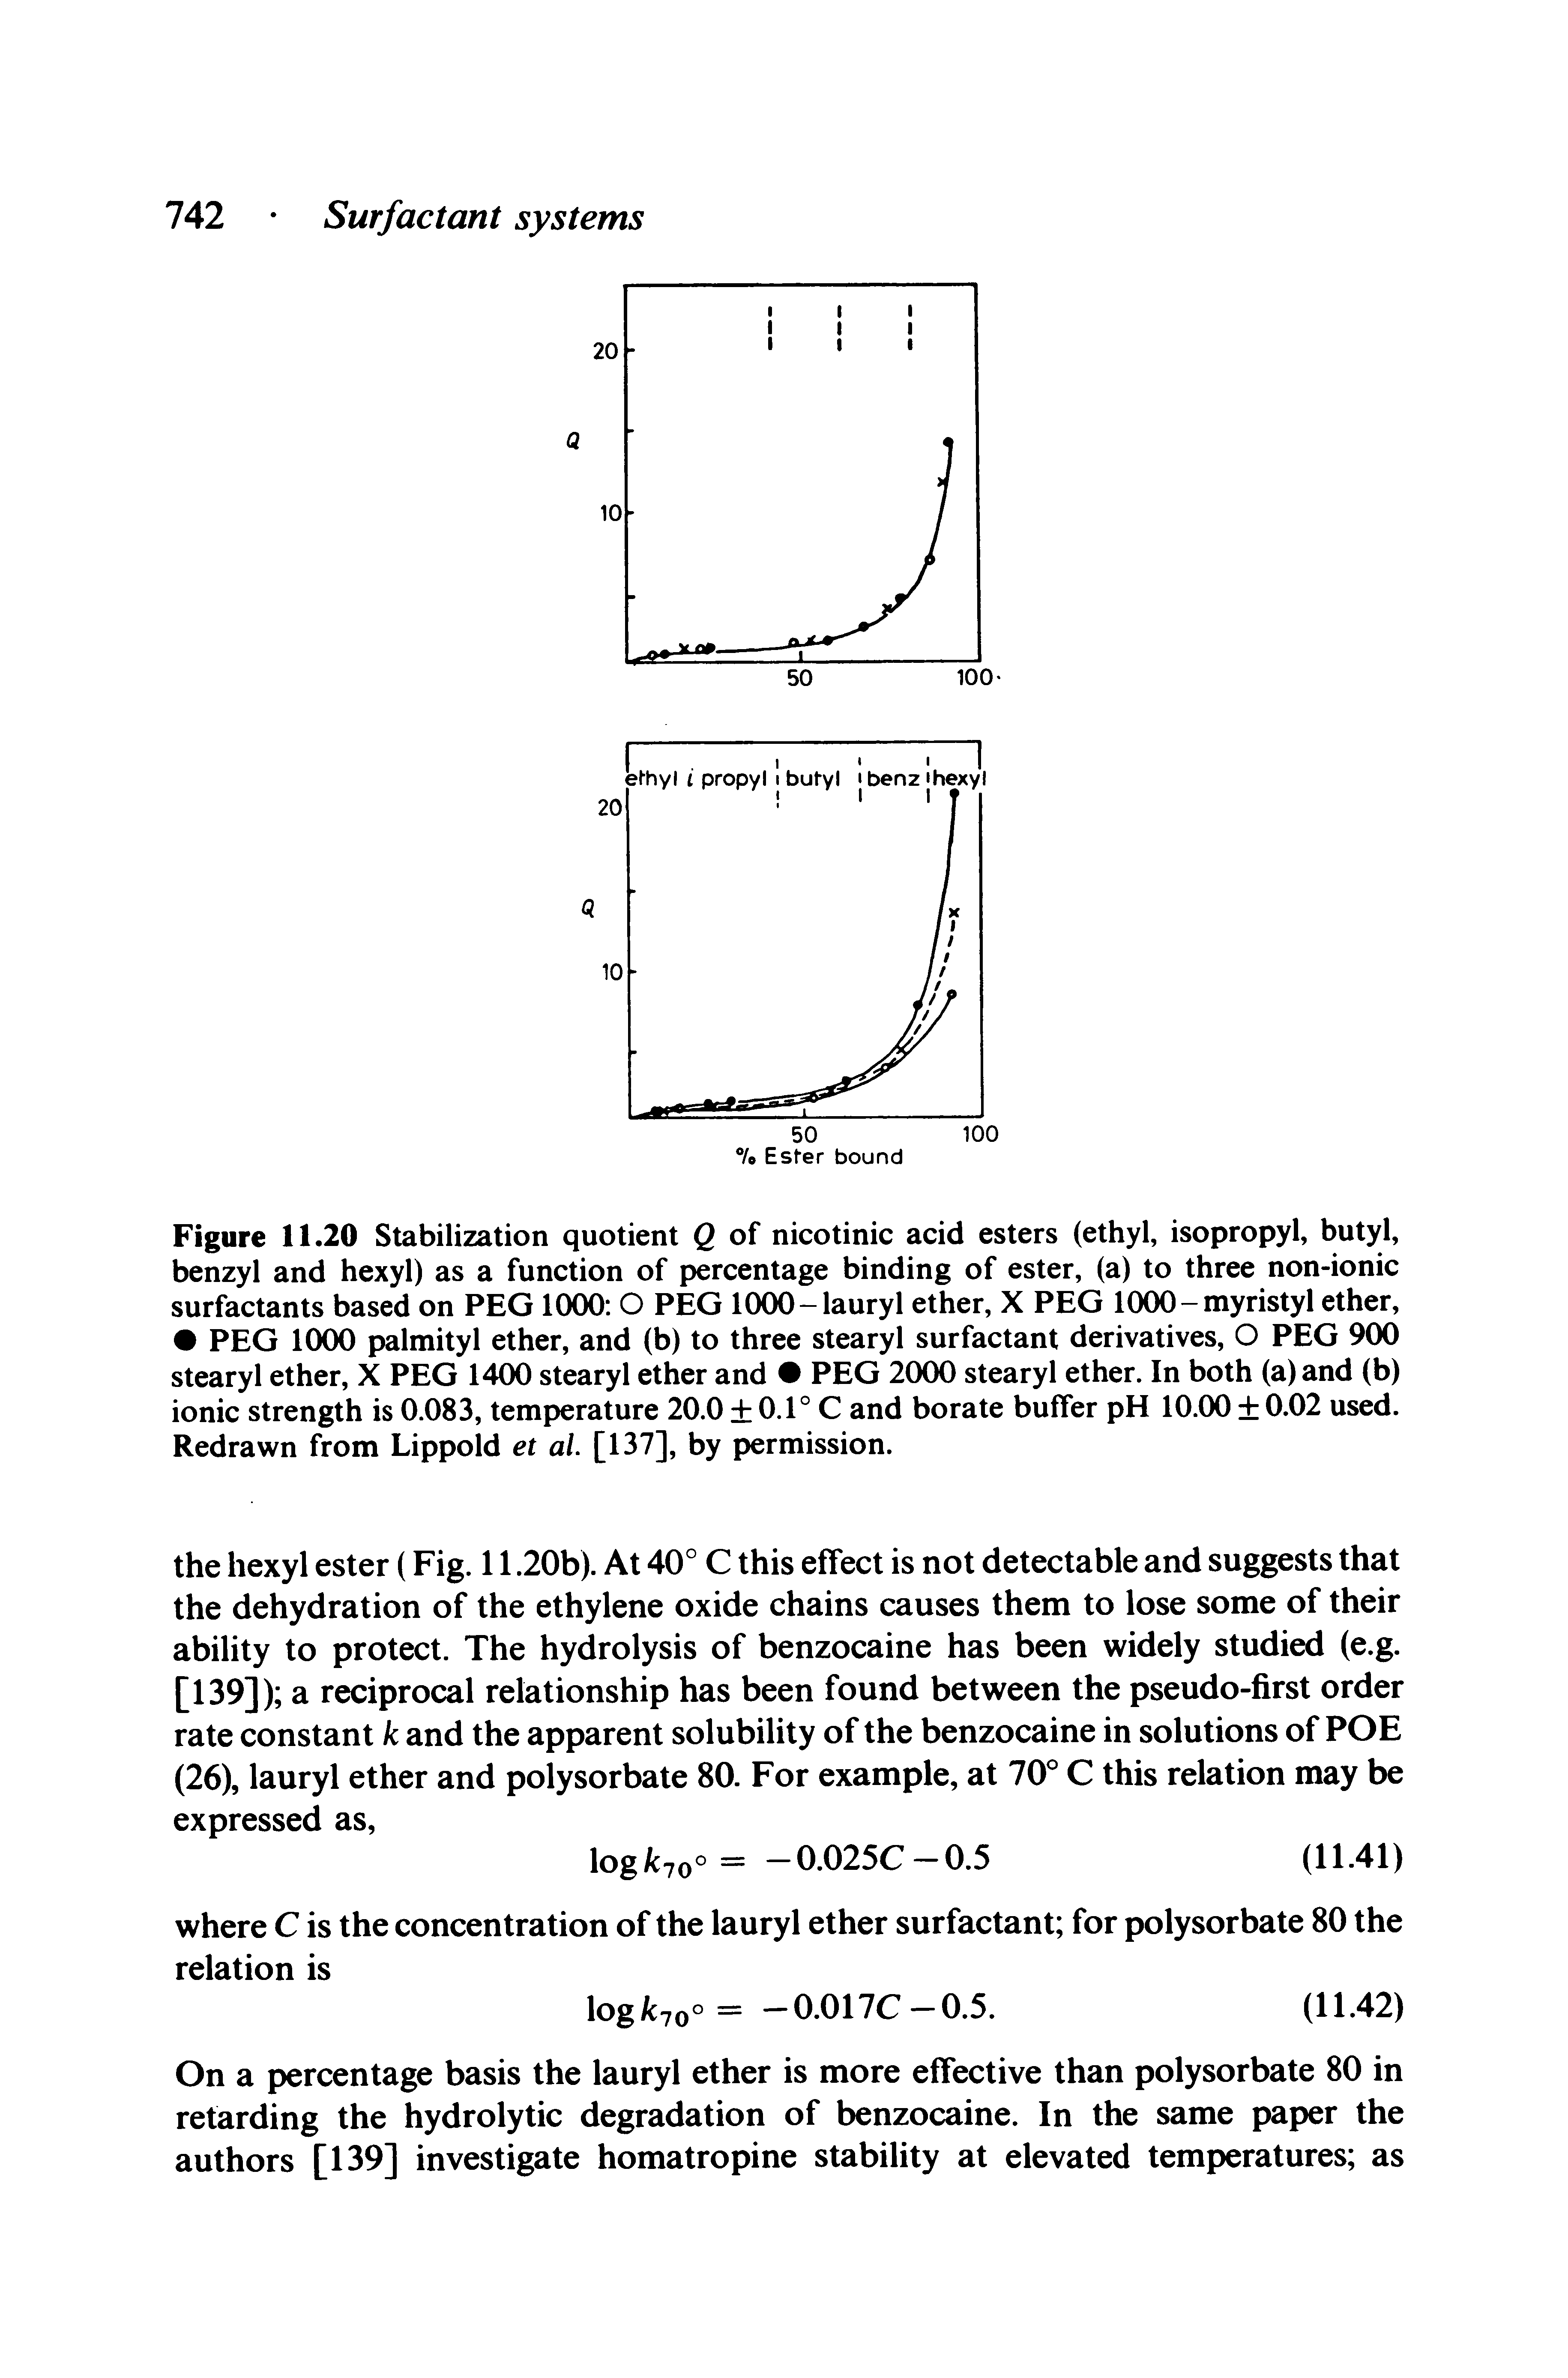 Figure 11.20 Stabilization quotient Q of nicotinic acid esters (ethyl, isopropyl, butyl, benzyl and hexyl) as a function of percentage binding of ester, (a) to three non-ionic surfactants based on PEG lOCX) O PEG l(X)0-lauryl ether, X PEG l(XX)-myristyl ether, PEG 1000 palmityl ether, and (b) to three stearyl surfactant derivatives, O PEG 900 stearyl ether, X PEG 1400 stearyl ether and PEG 2000 stearyl ether. In both (a) and (b) ionic strength is 0.083, temperature 20.0 0.1° C and borate buffer pH 10.(X) 0.02 used. Redrawn from Lippold et al [137], by permission.